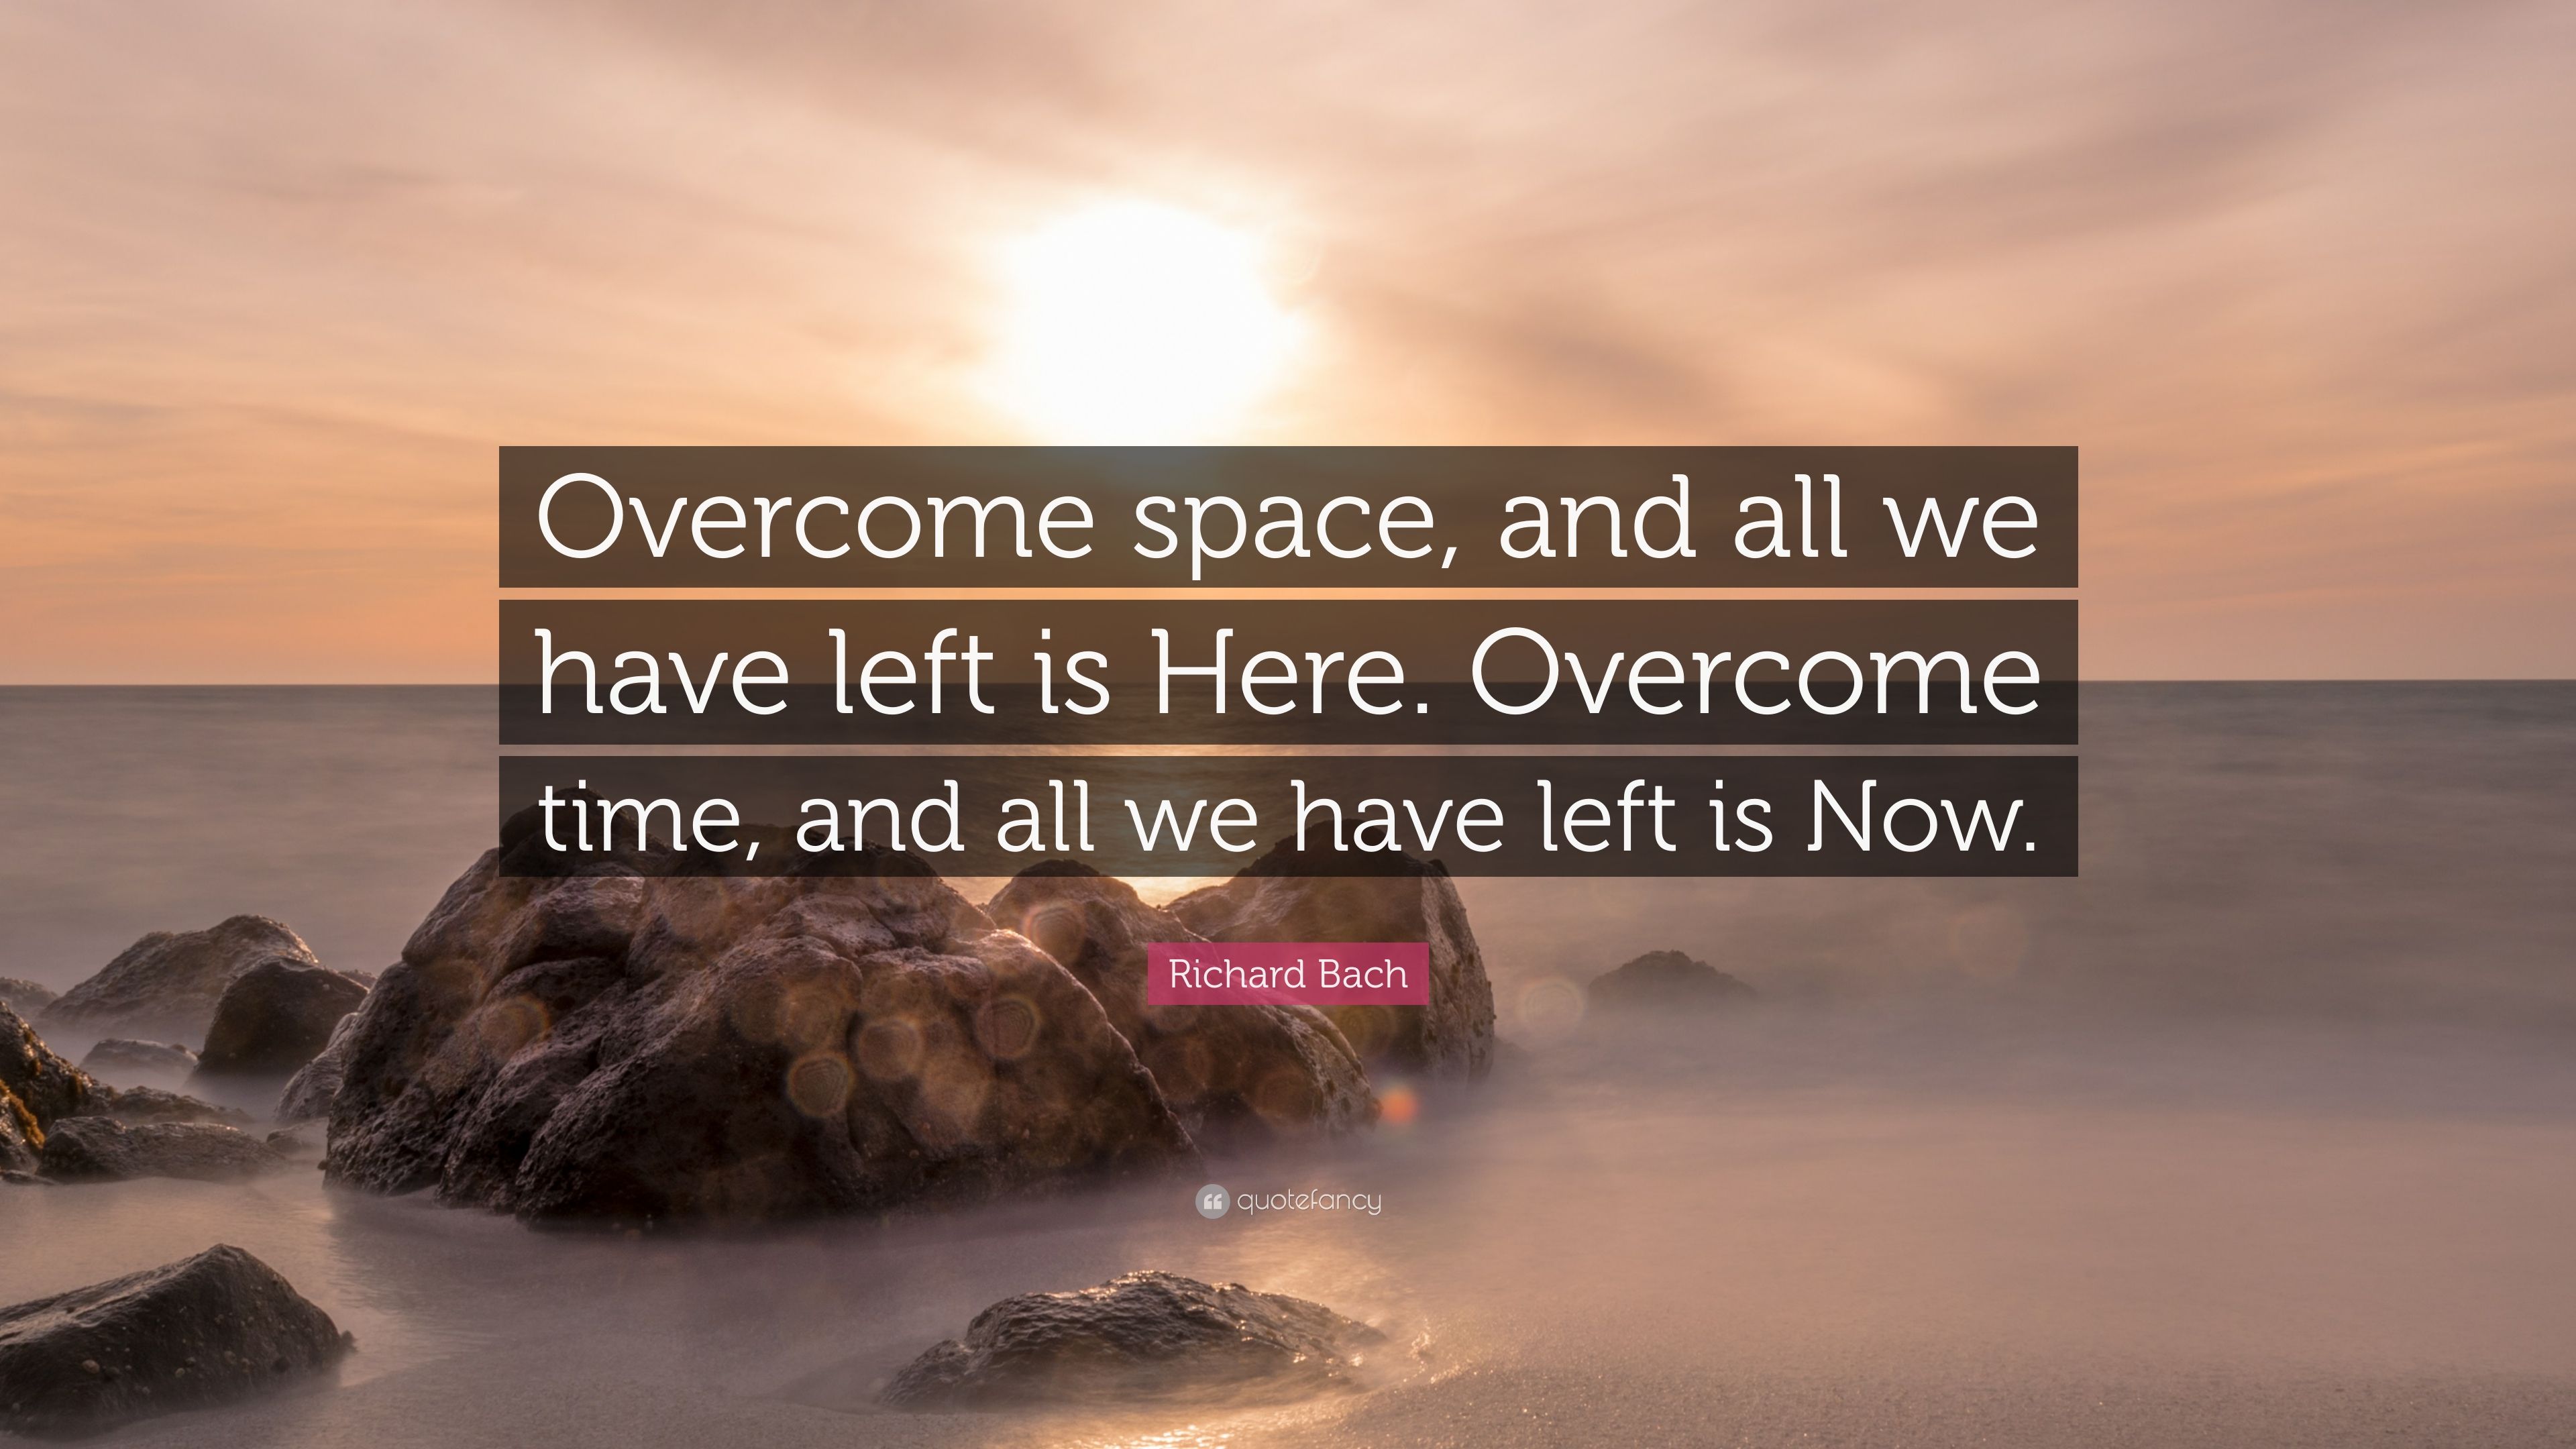 4735812-Richard-Bach-Quote-Overcome-space-and-all-we-have-left-is-Here.jpg